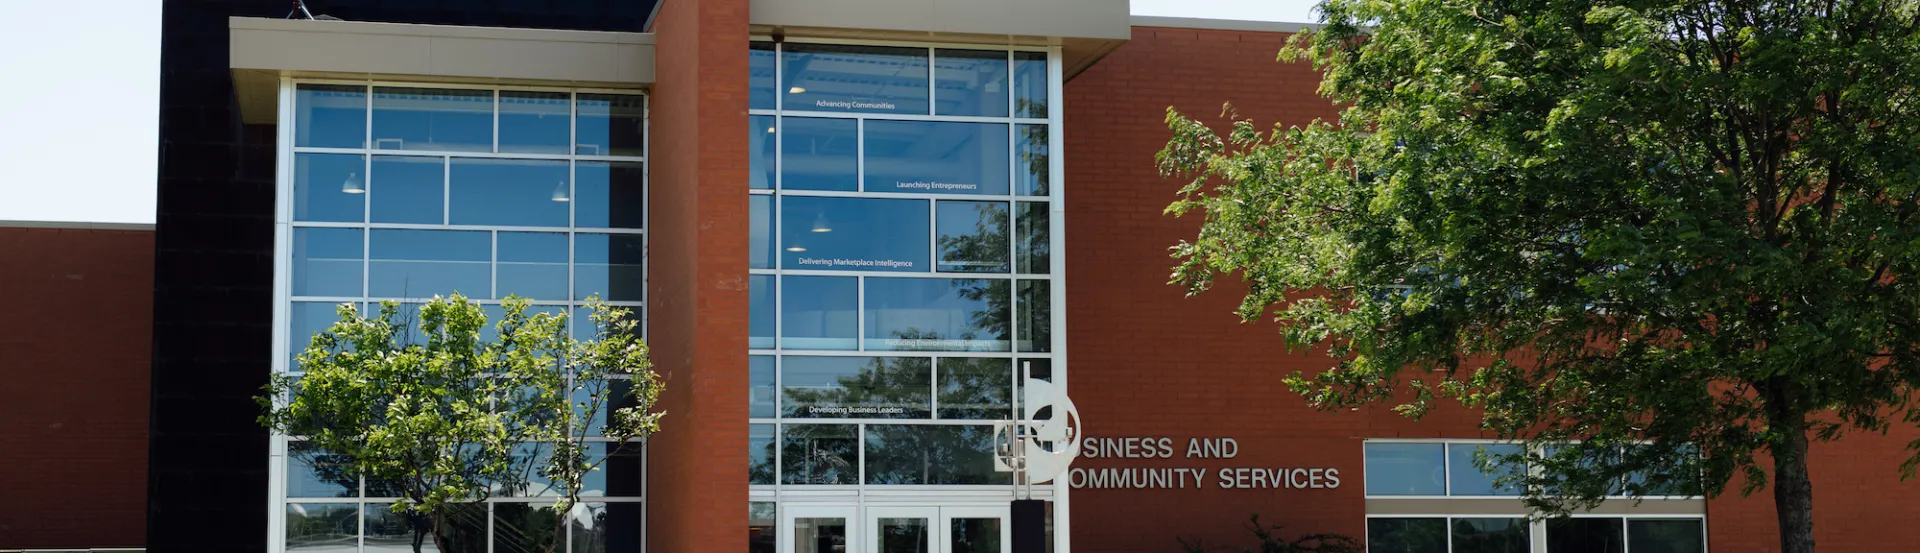 Photo of Business & Community Services